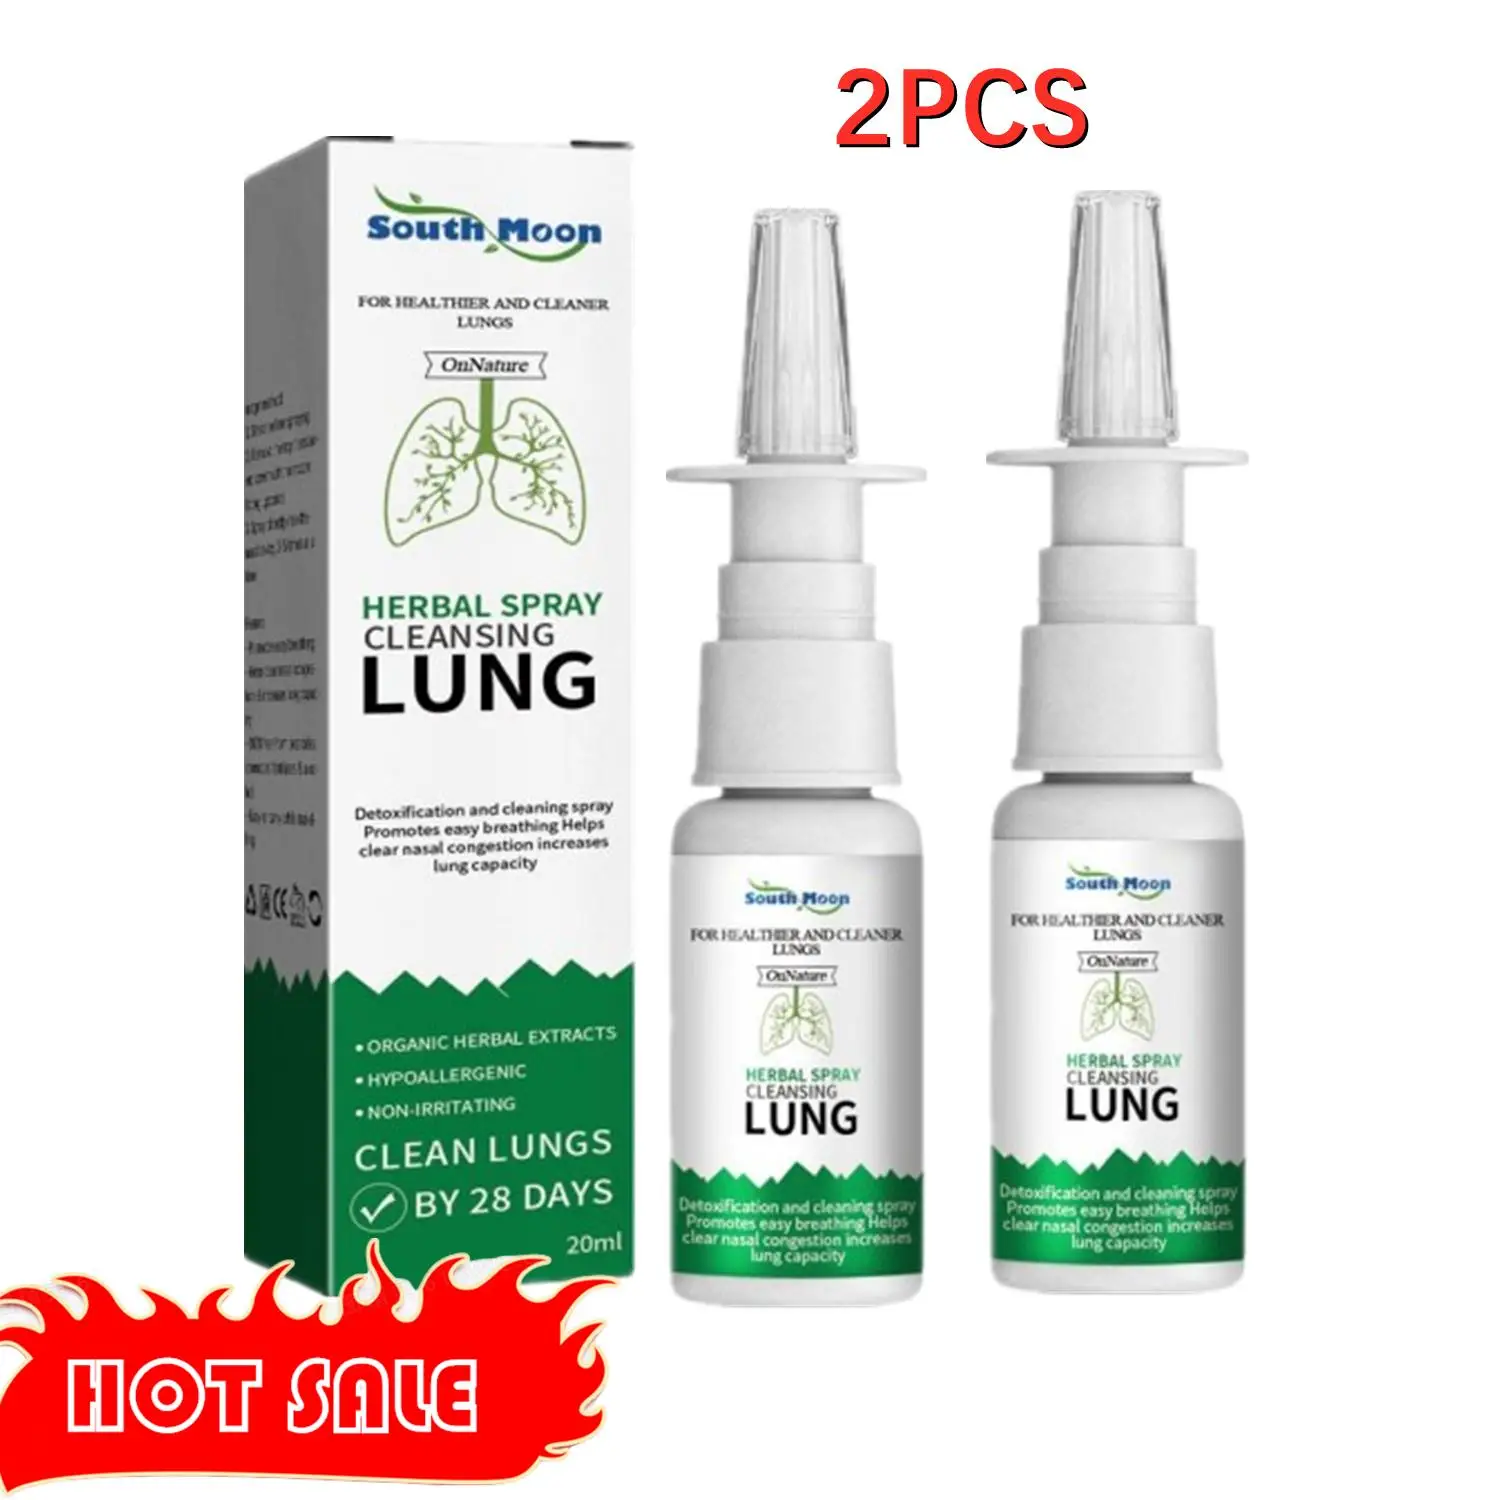 

2PCS Lung Detox Herbal Cleanser Spray For Smokers Clear Nasal Congestion Anti Snoring Solution Stop Snore Relief Spray Nose 20ml